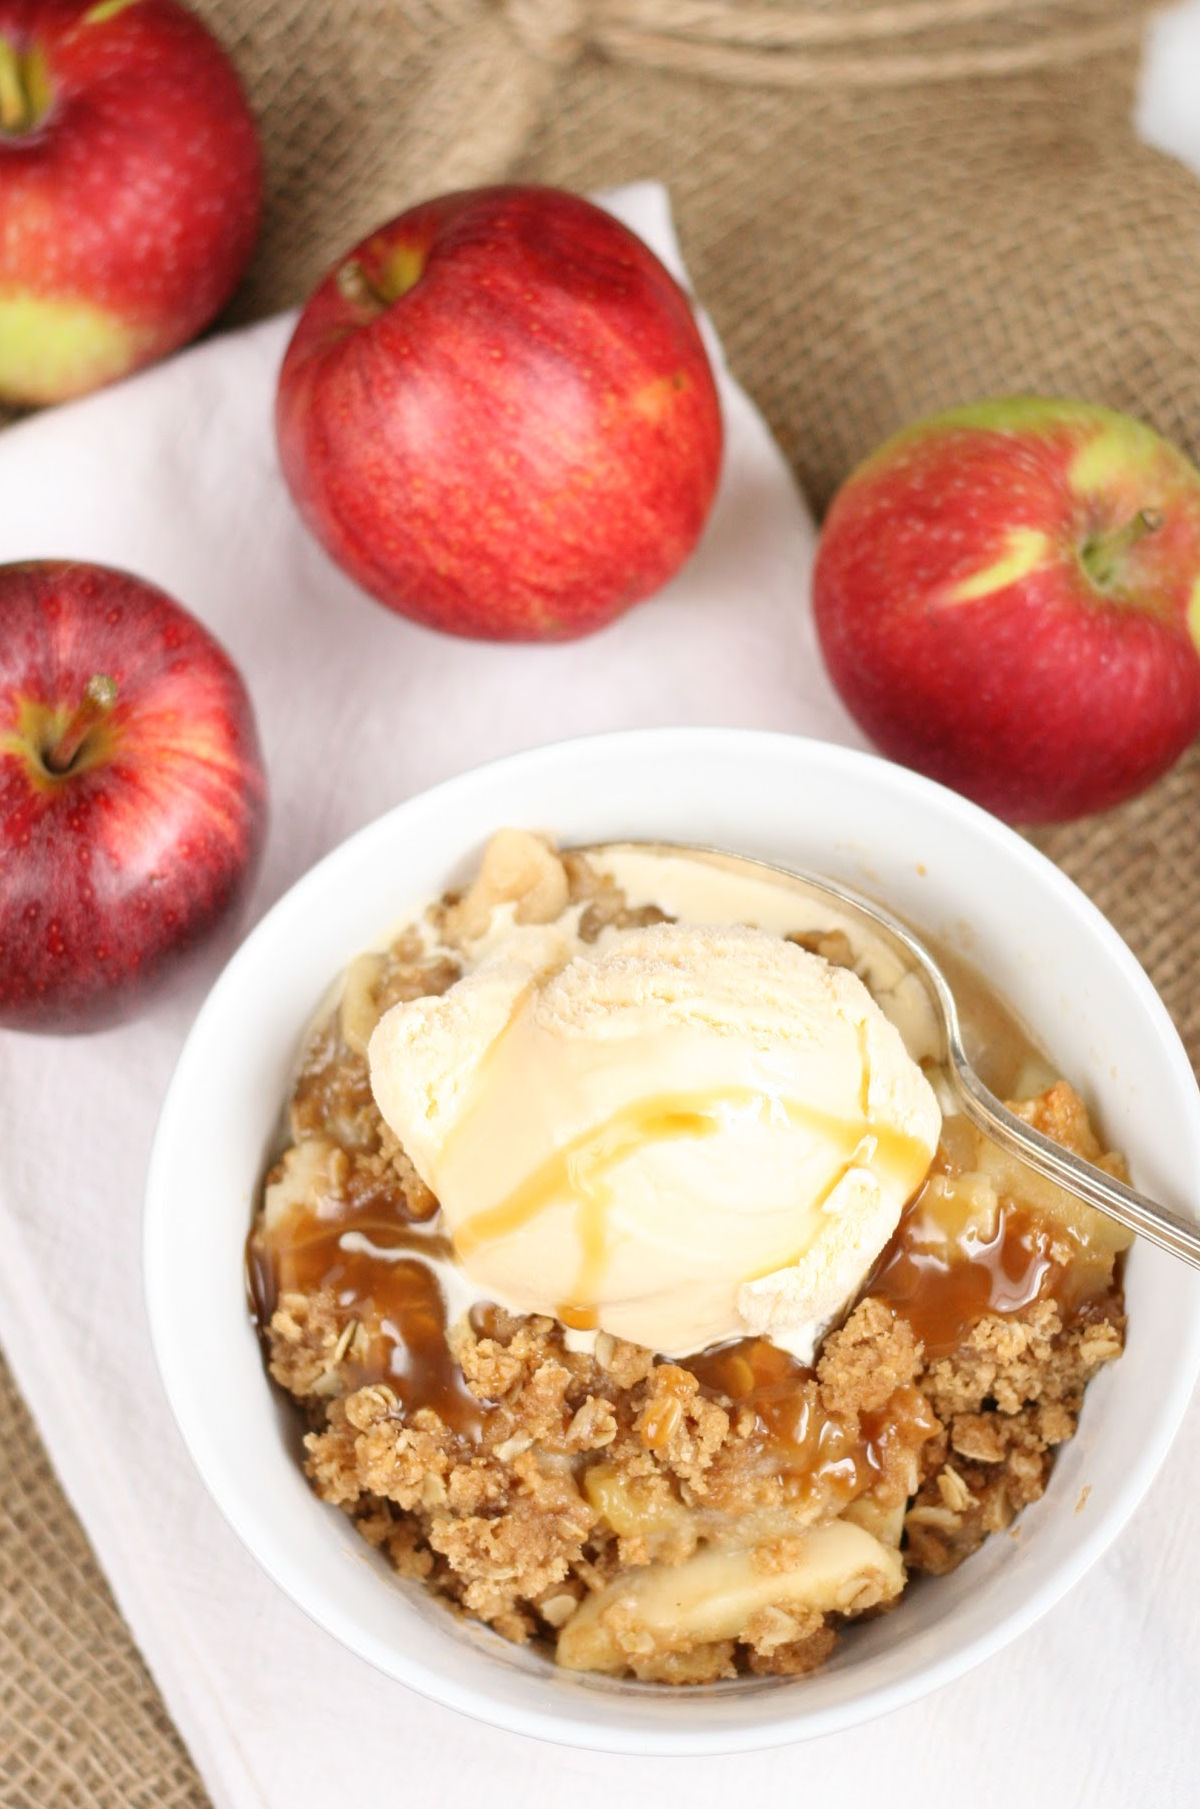 Apple crisp with oatmeal topping in small white bowl, topped with vanilla ice cream.